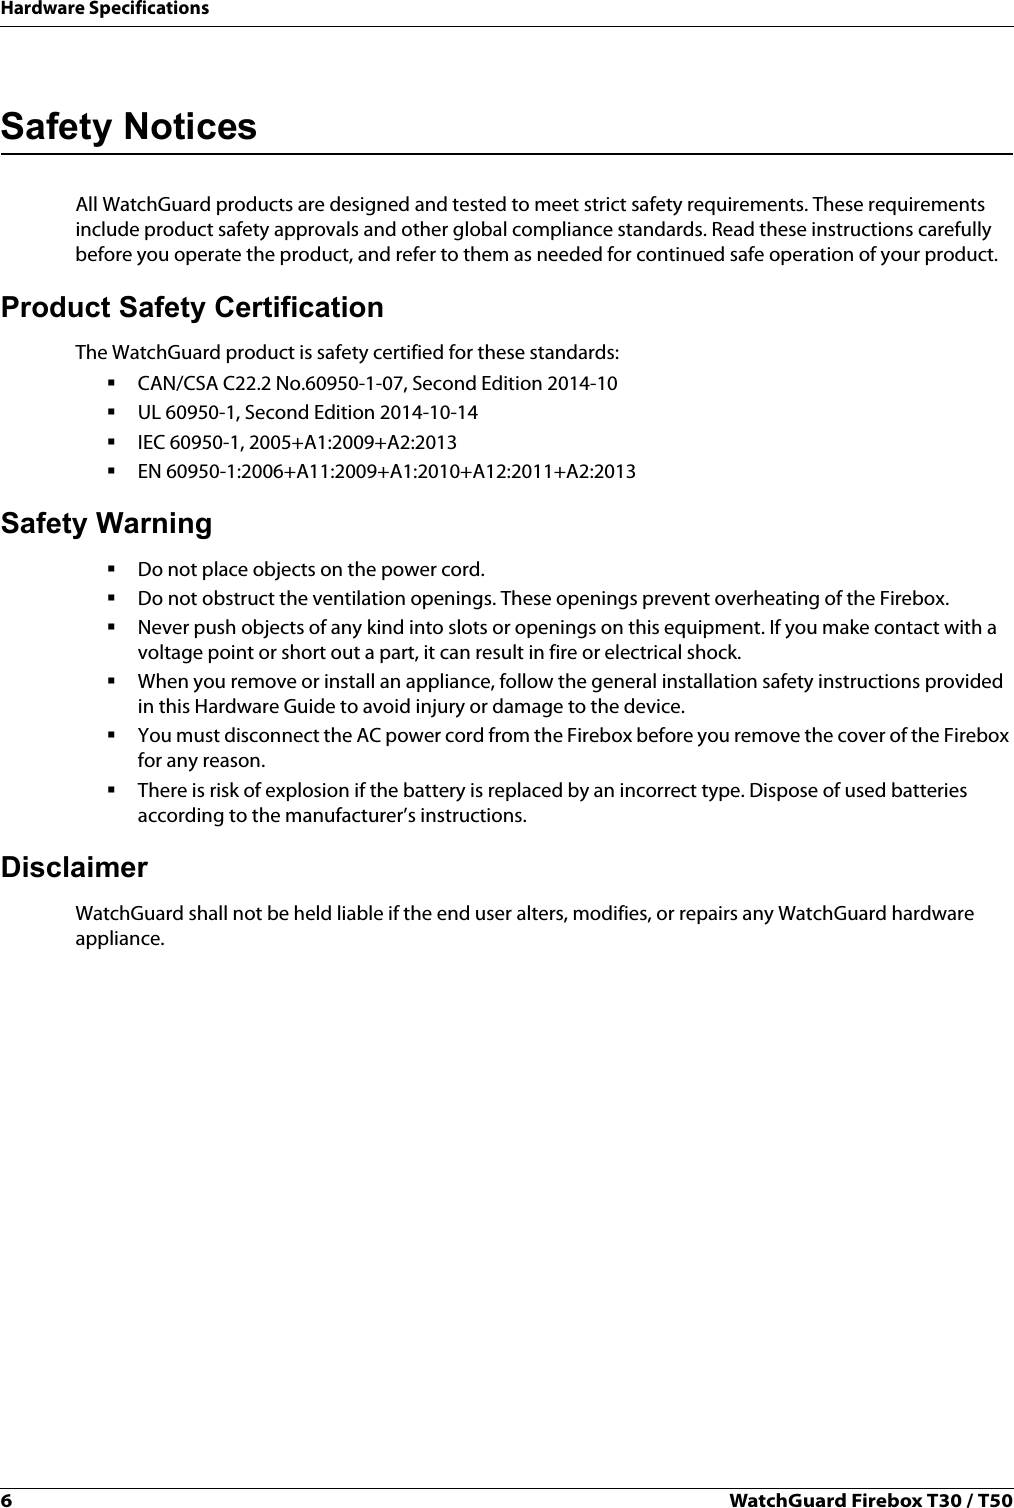 6WatchGuard Firebox T30 / T50Hardware SpecificationsSafety NoticesAll WatchGuard products are designed and tested to meet strict safety requirements. These requirements include product safety approvals and other global compliance standards. Read these instructions carefully before you operate the product, and refer to them as needed for continued safe operation of your product.Product Safety CertificationThe WatchGuard product is safety certified for these standards:CAN/CSA C22.2 No.60950-1-07, Second Edition 2014-10UL 60950-1, Second Edition 2014-10-14IEC 60950-1, 2005+A1:2009+A2:2013EN 60950-1:2006+A11:2009+A1:2010+A12:2011+A2:2013Safety WarningDo not place objects on the power cord.Do not obstruct the ventilation openings. These openings prevent overheating of the Firebox.Never push objects of any kind into slots or openings on this equipment. If you make contact with a voltage point or short out a part, it can result in fire or electrical shock.When you remove or install an appliance, follow the general installation safety instructions provided in this Hardware Guide to avoid injury or damage to the device.You must disconnect the AC power cord from the Firebox before you remove the cover of the Firebox for any reason.There is risk of explosion if the battery is replaced by an incorrect type. Dispose of used batteries according to the manufacturer’s instructions.DisclaimerWatchGuard shall not be held liable if the end user alters, modifies, or repairs any WatchGuard hardware appliance.